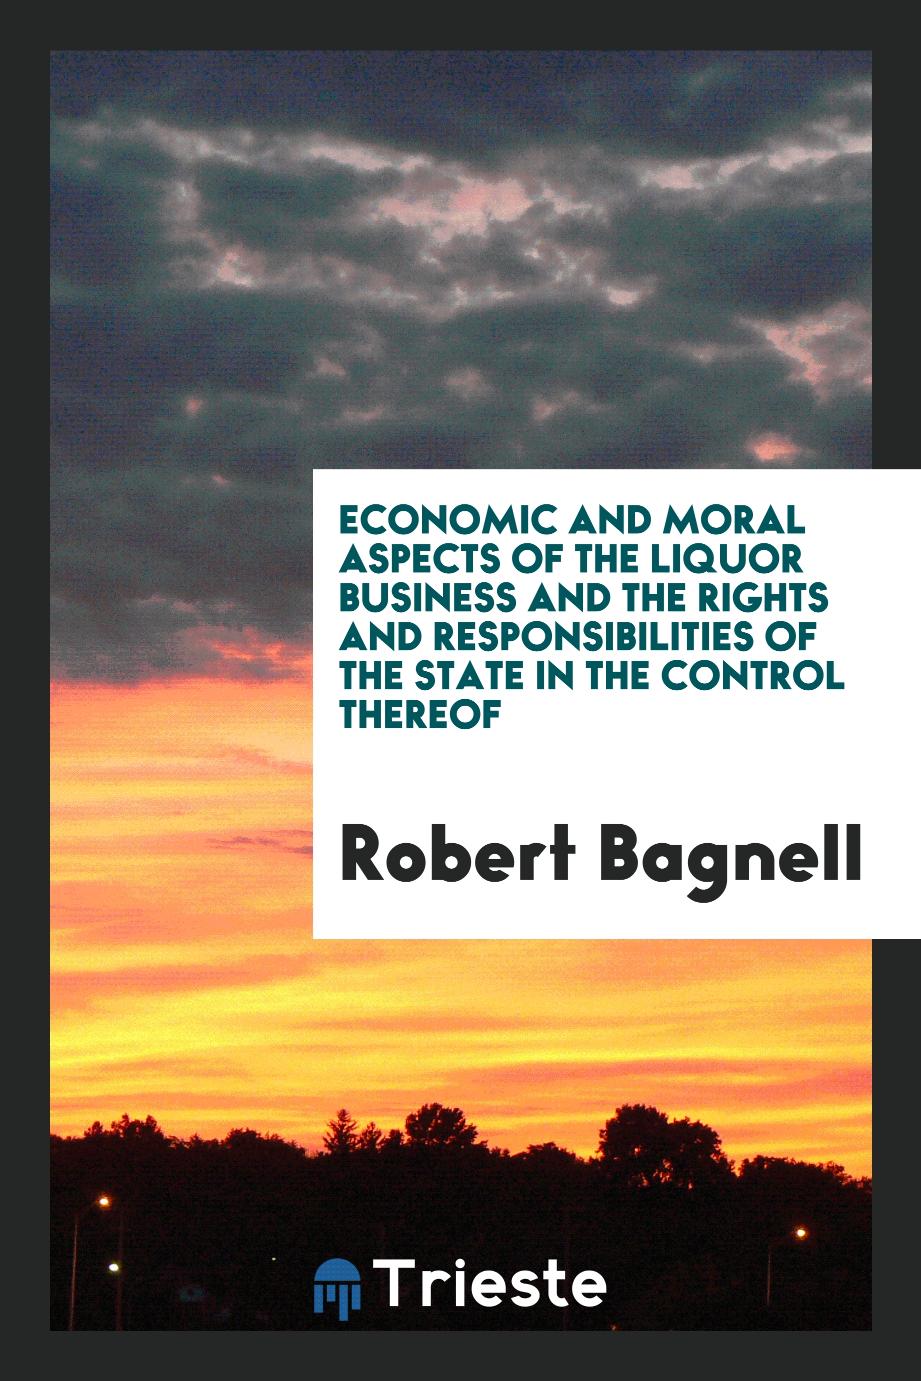 Economic and Moral Aspects of the Liquor Business and the Rights and Responsibilities of the State in the Control Thereof